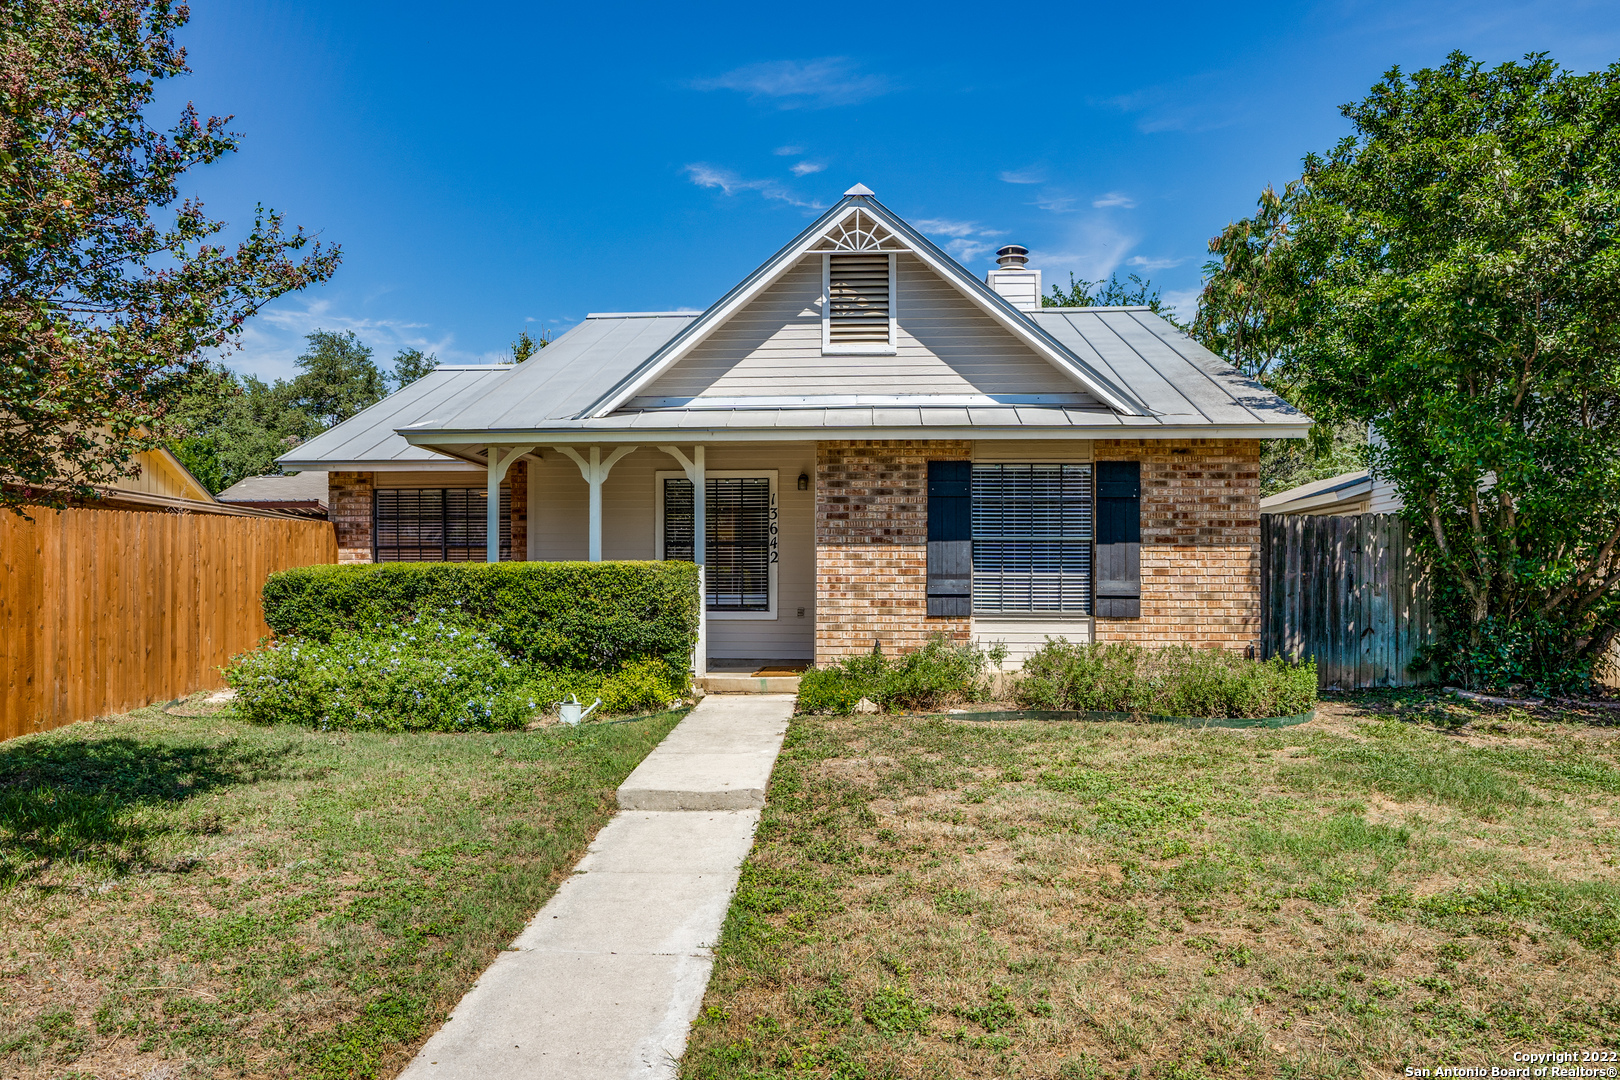 Beautifully remodeled with attention to detail, this cottage on a cul-de-sac is a perfect fit for the discerning buyer seeking a low-maintenance garden home lifestyle. Nestled in the desirable Castle Hills Forest subdivision, this single-story charmer is within walking distance to the popular Salado Creek hike & bike trail and Hardberger Park.  The voluntary neighborhood association has a well-maintained park with a pool, playground and sports courts (fee to join). Quick access to upscale shopping and restaurants, the medical center, and the airport. The living and dining area features high ceilings, built-in storage and a fireplace with shiplap accents. The large, bright kitchen boasts butcher block countertops and space for an island or additional dining area; French doors lead to the expanded shaded patio and yard with a storage shed for your garden tools. The large master bedroom has additional outside access to a private patio for morning coffee or an evening rest.  Schedule your showing today!